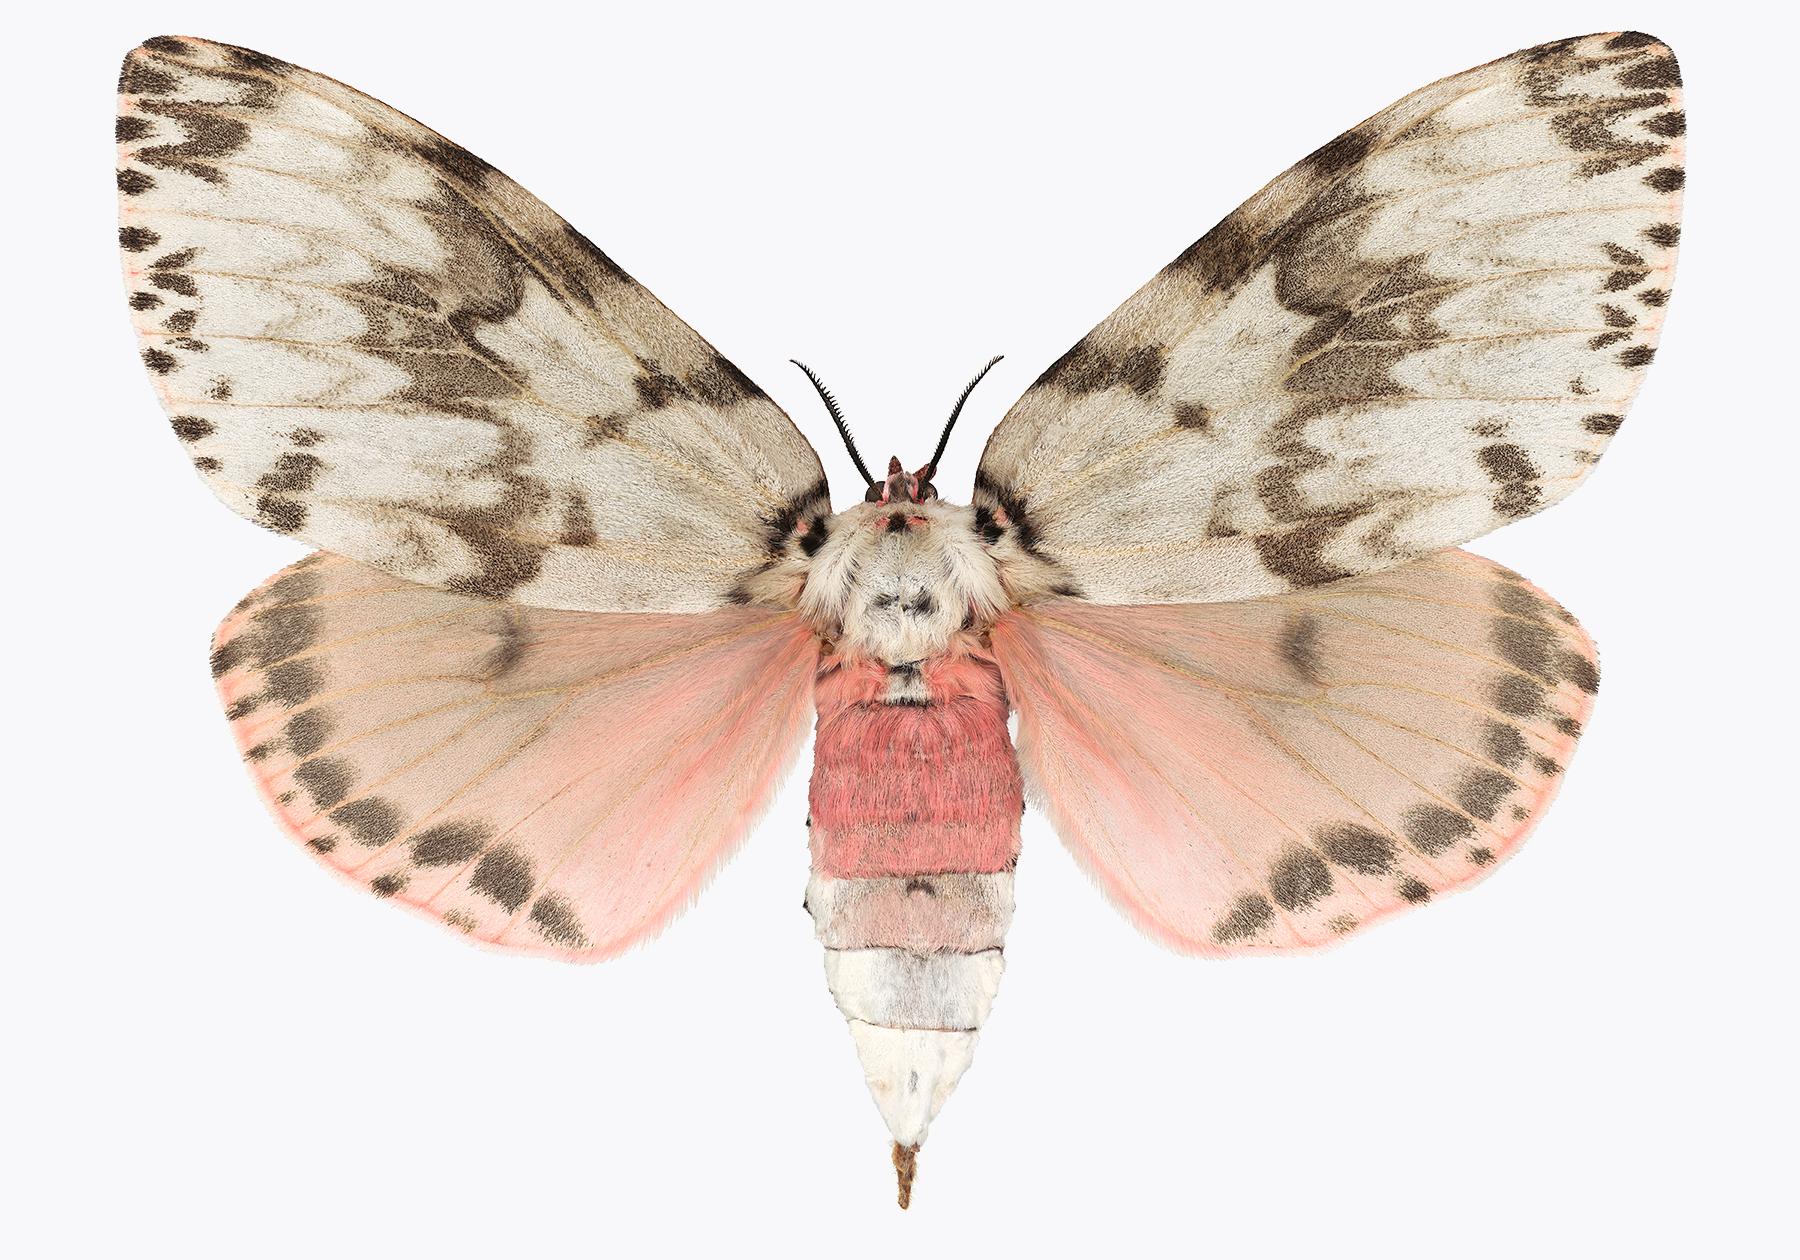 Joseph Scheer Color Photograph - Lymantria Mathura, Nature Photograph of Pink and Brown Moth on White Background